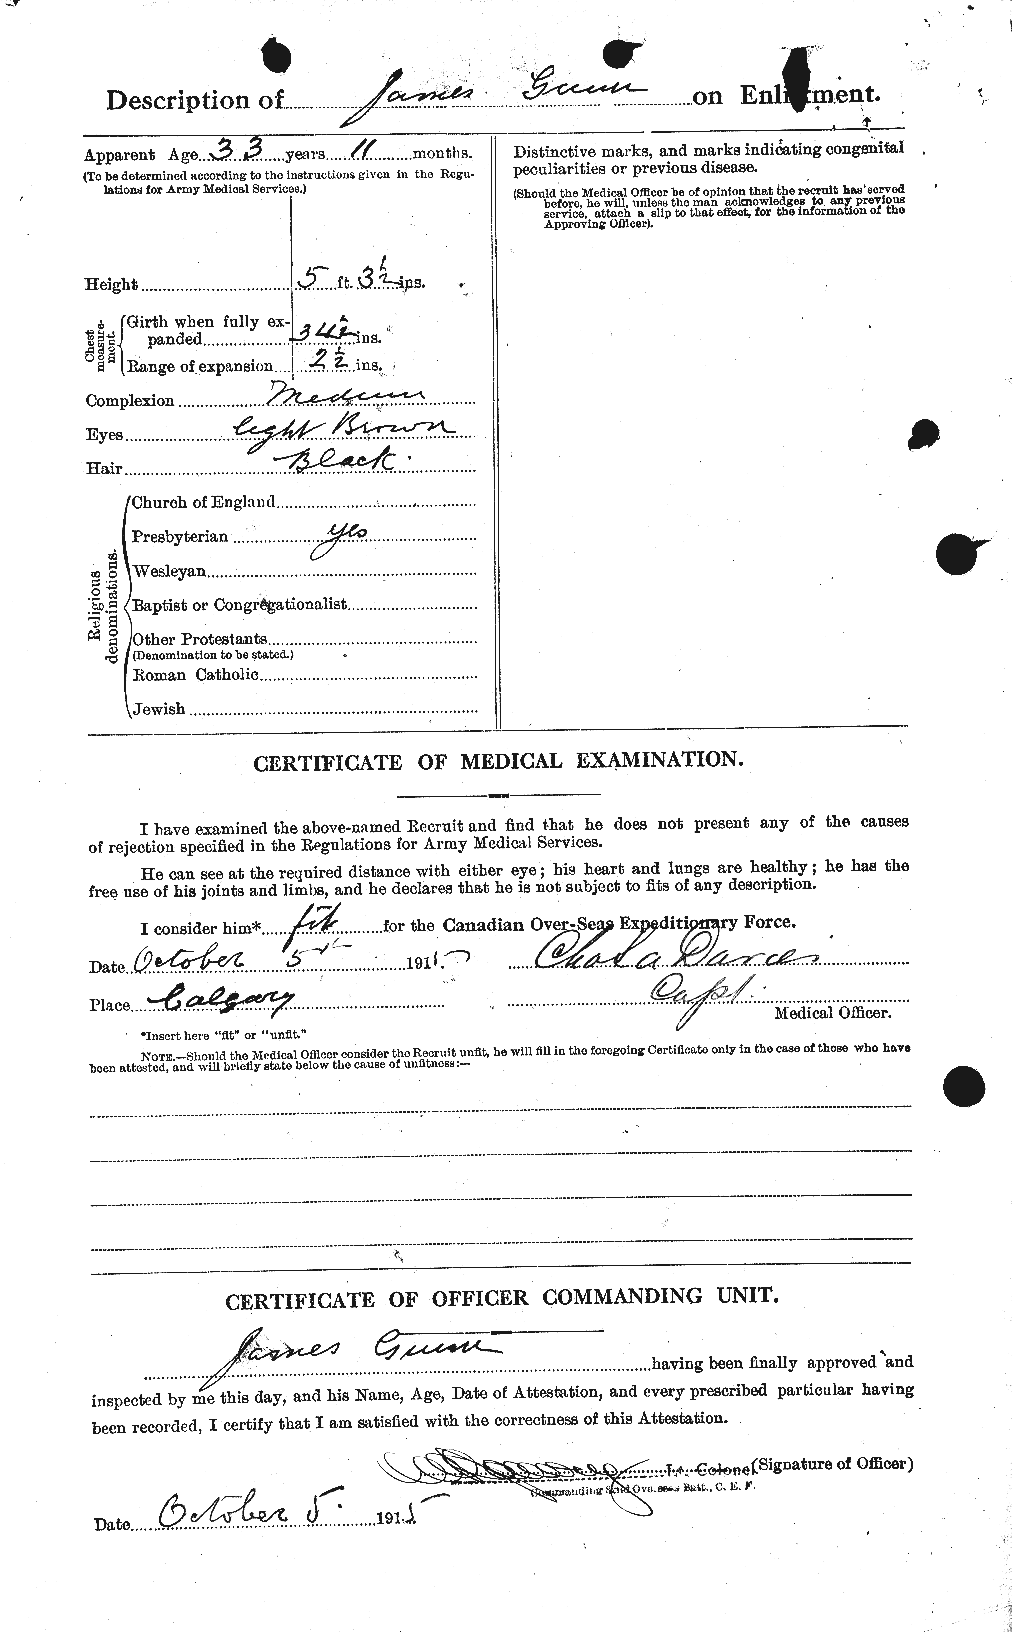 Personnel Records of the First World War - CEF 369271b